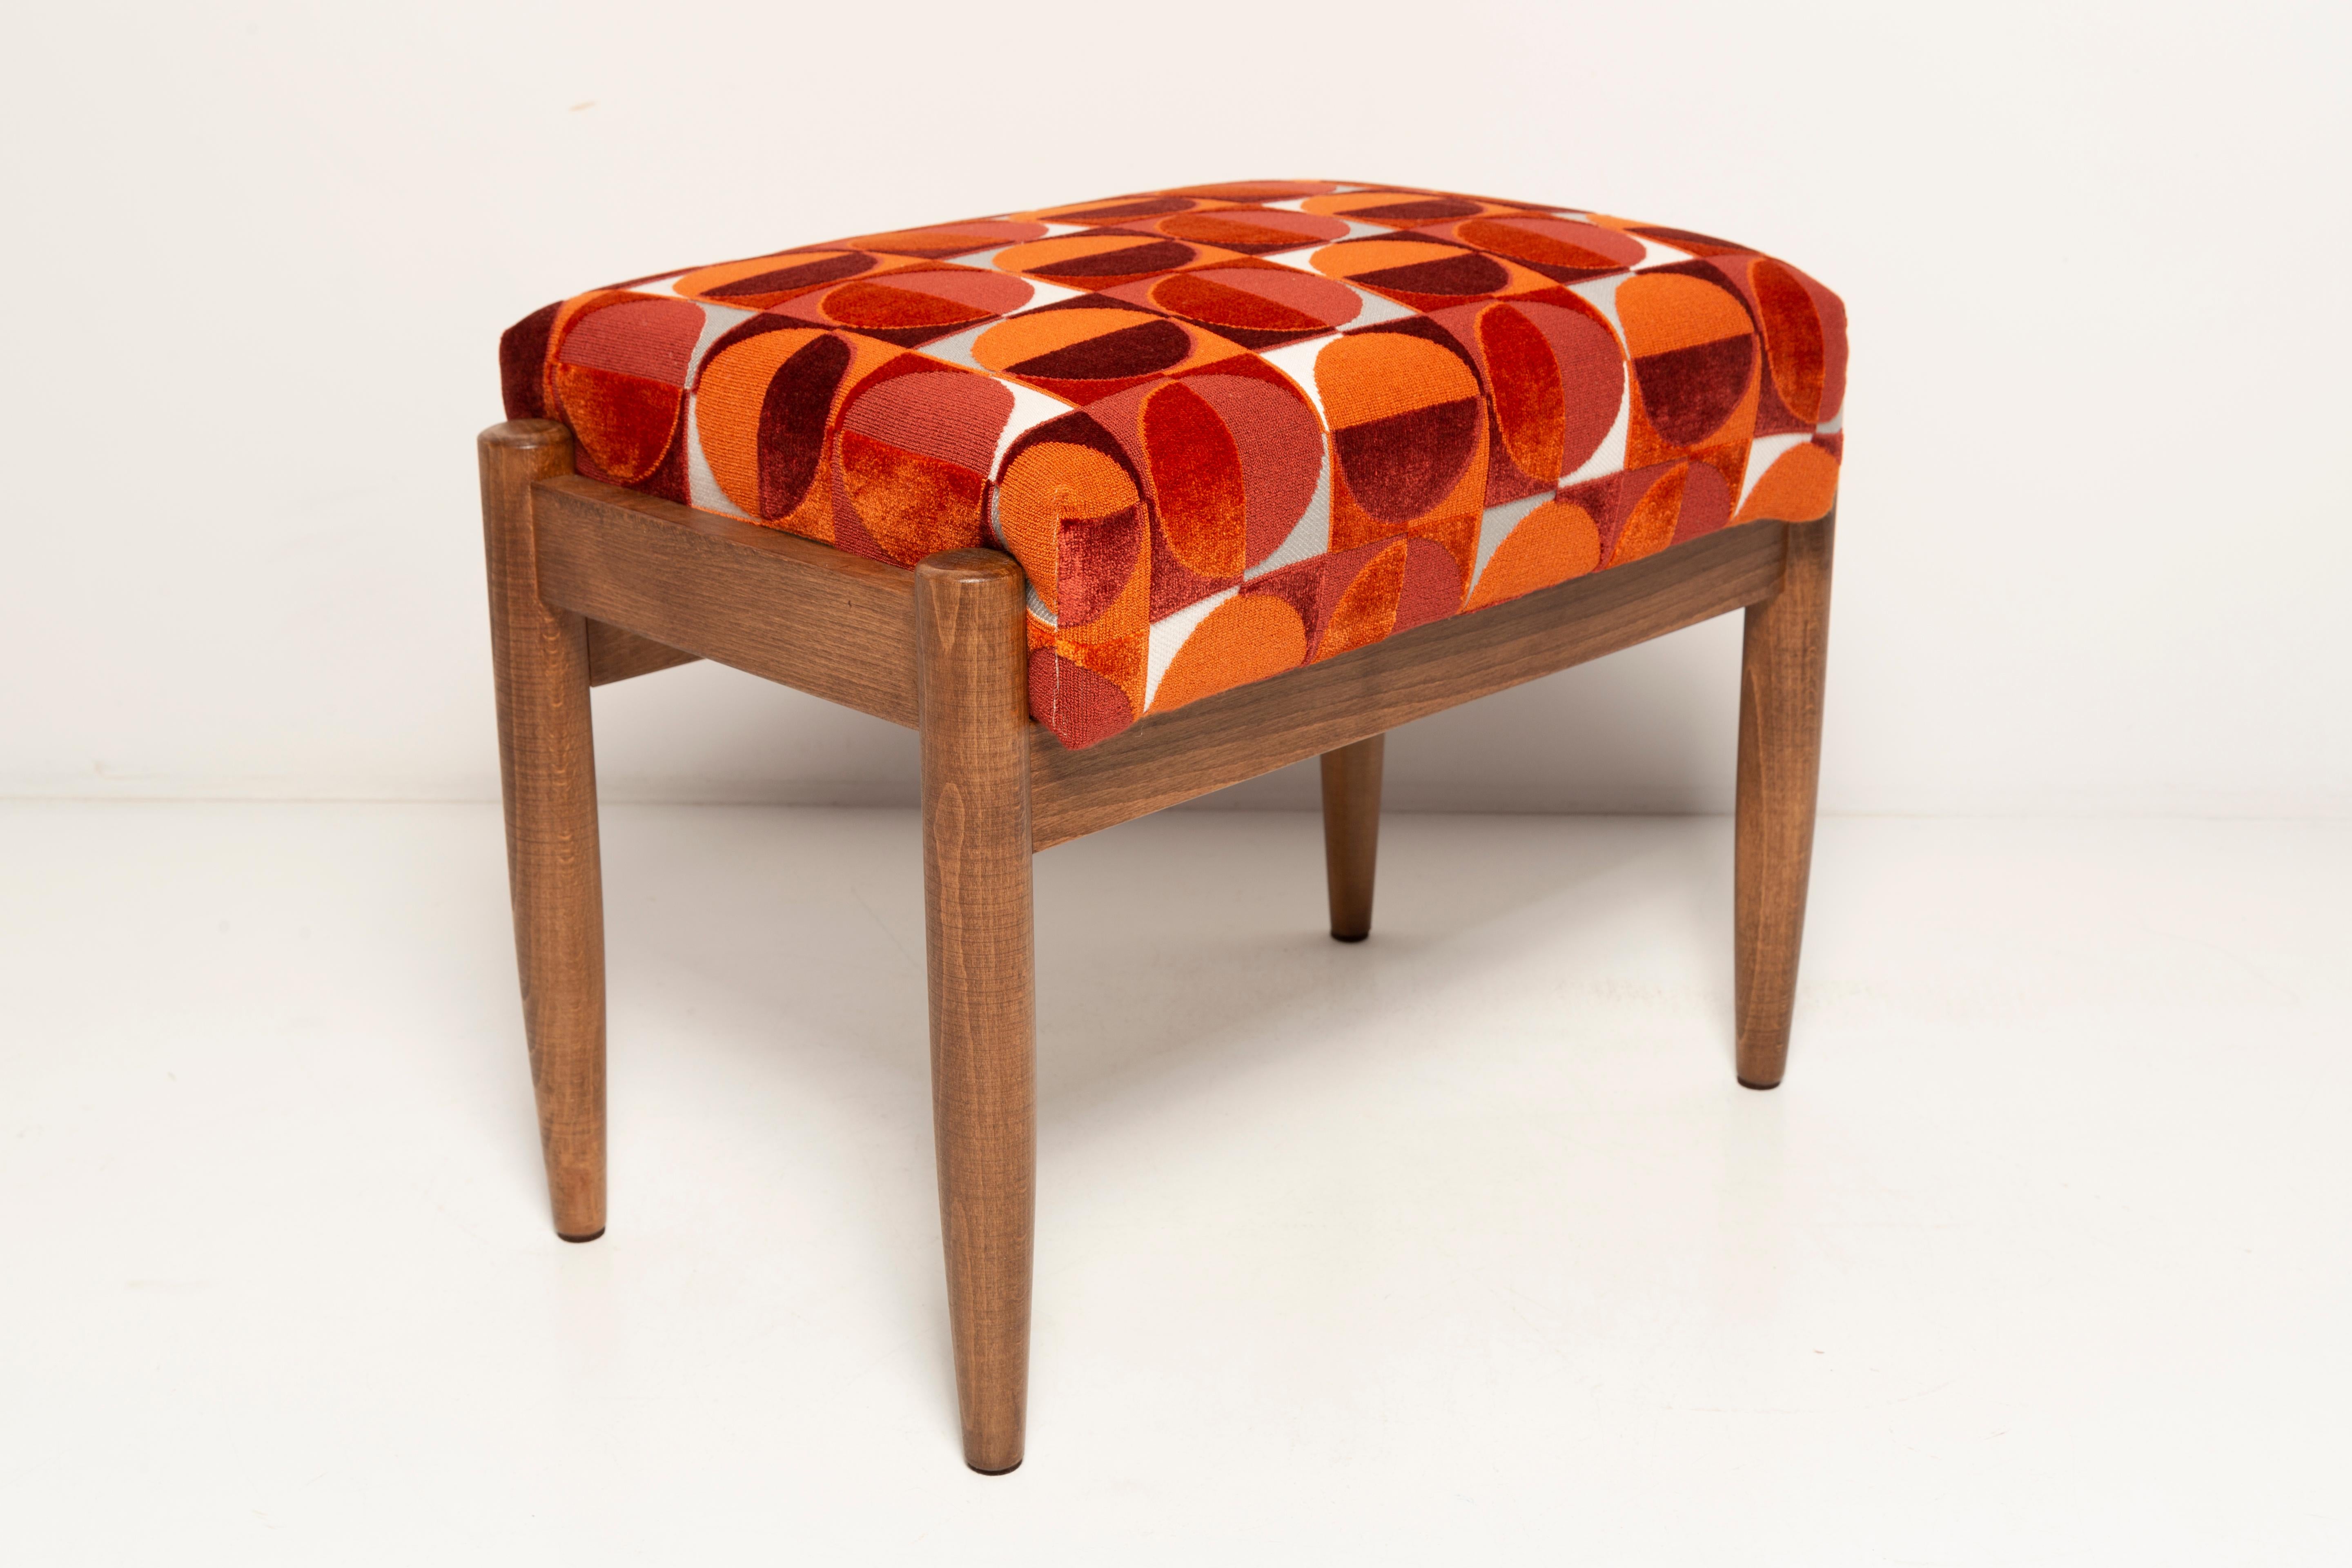 20th Century Pair of Midcentury Red and Orange Vintage Stools, Edmund Homa, 1960s For Sale